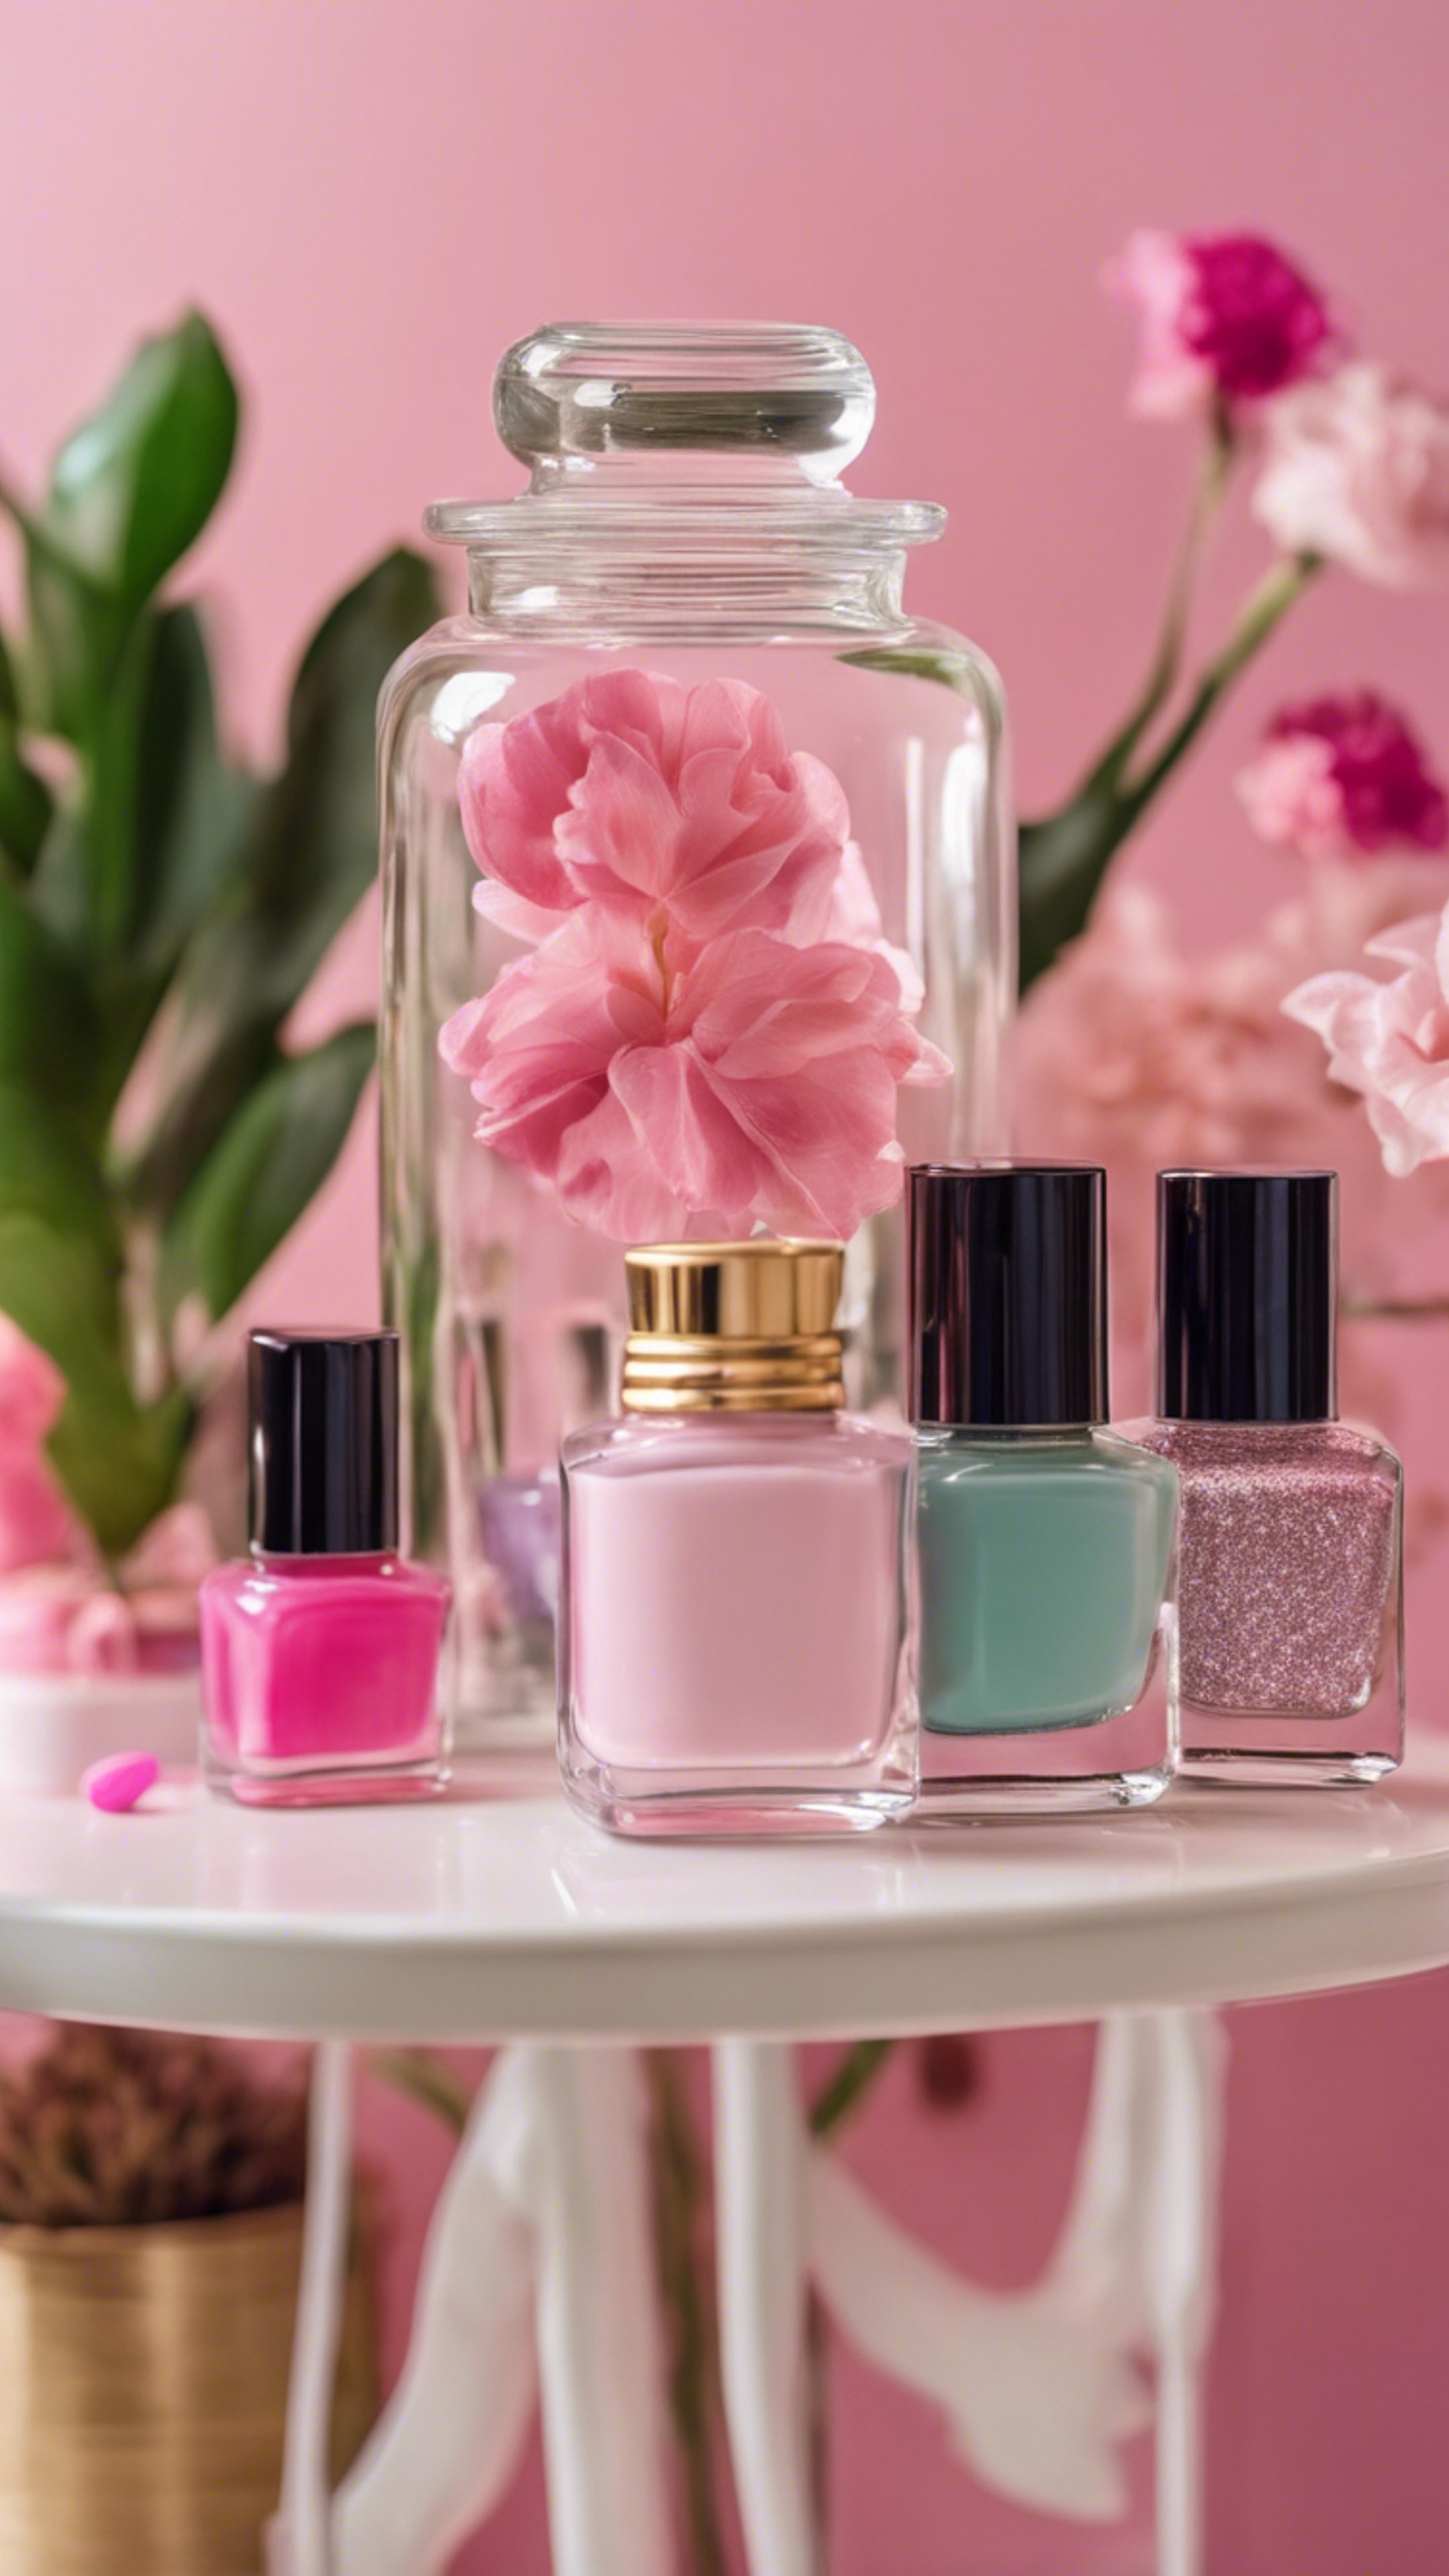 A glass jar full of colorful girly nail polishes on a pink dressing table with a chic plant in the background. duvar kağıdı[6e6d72fe0d8e4450902a]